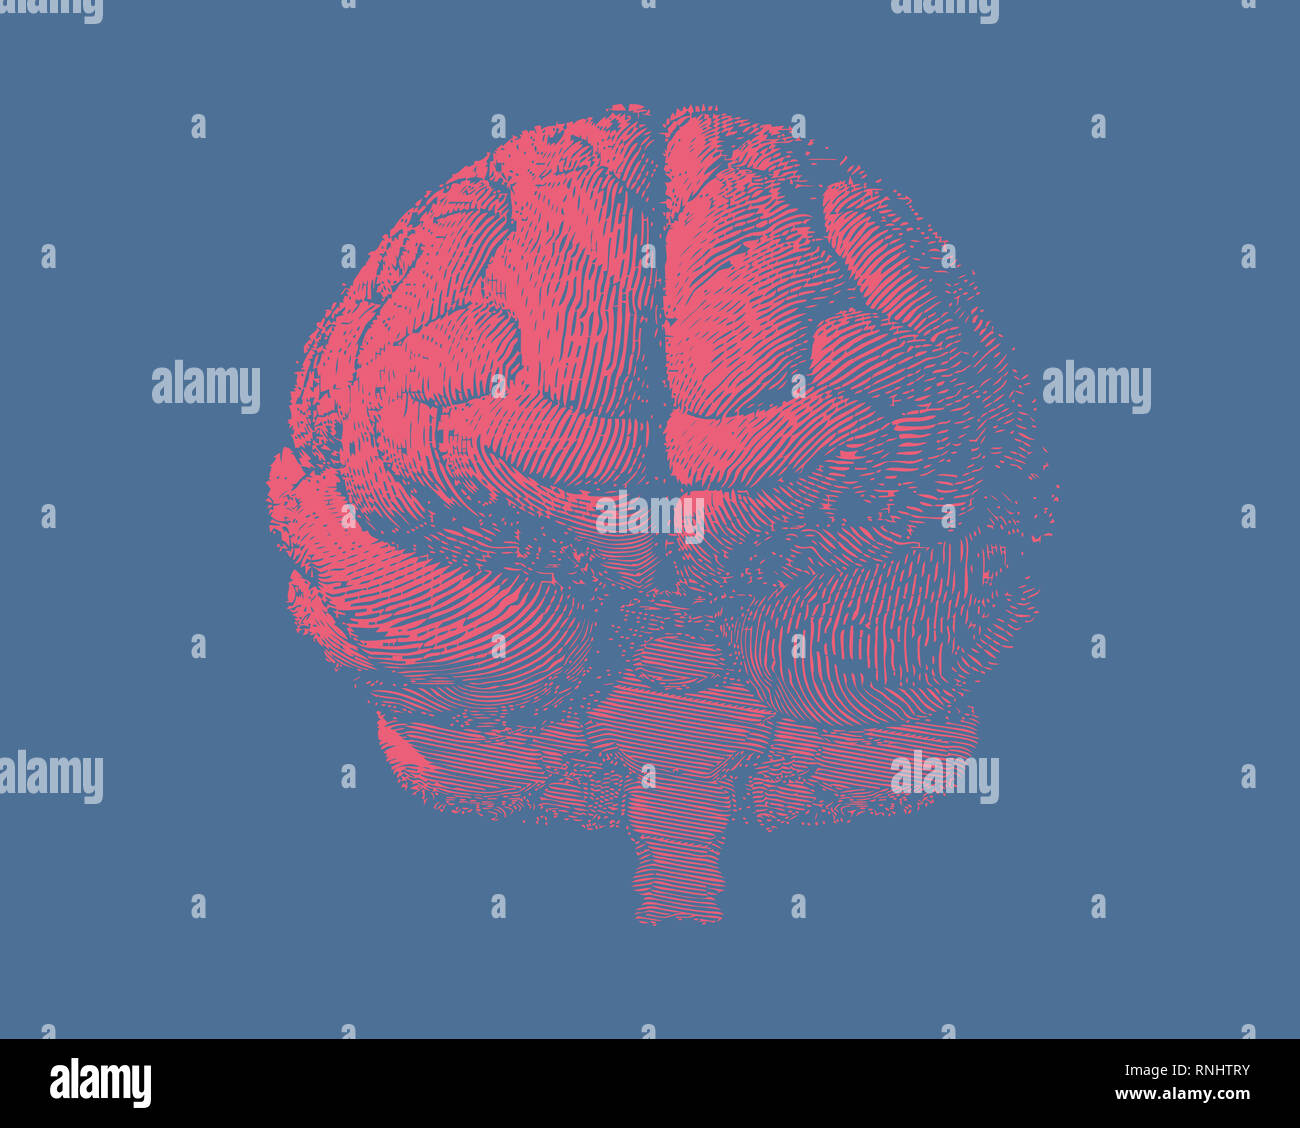 Pink engraving brain illustration in front view on light blue background Stock Photo